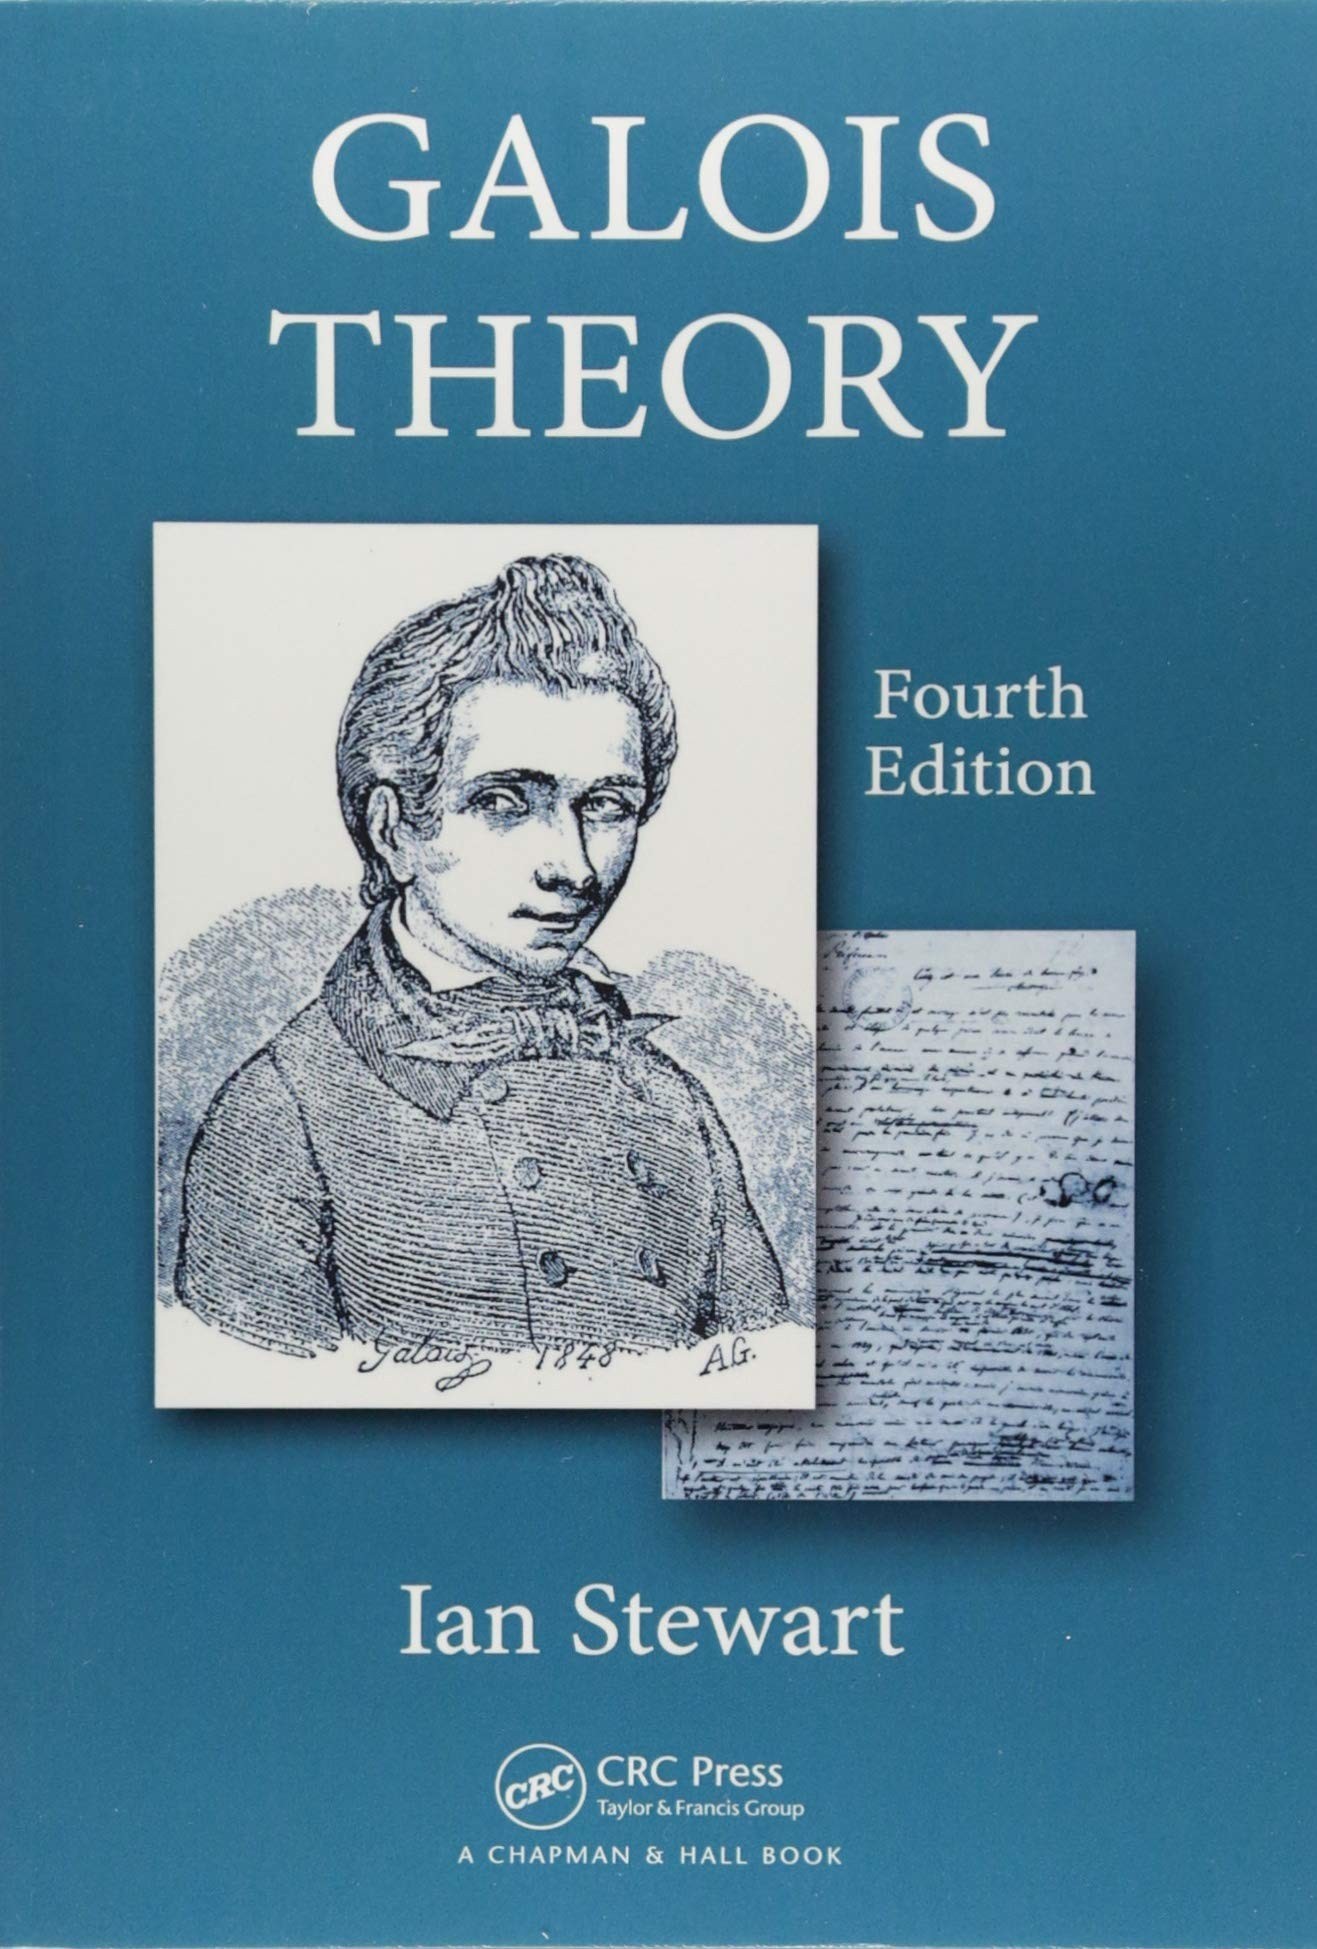 Galois Theory 4th Edition - Solutions Manual